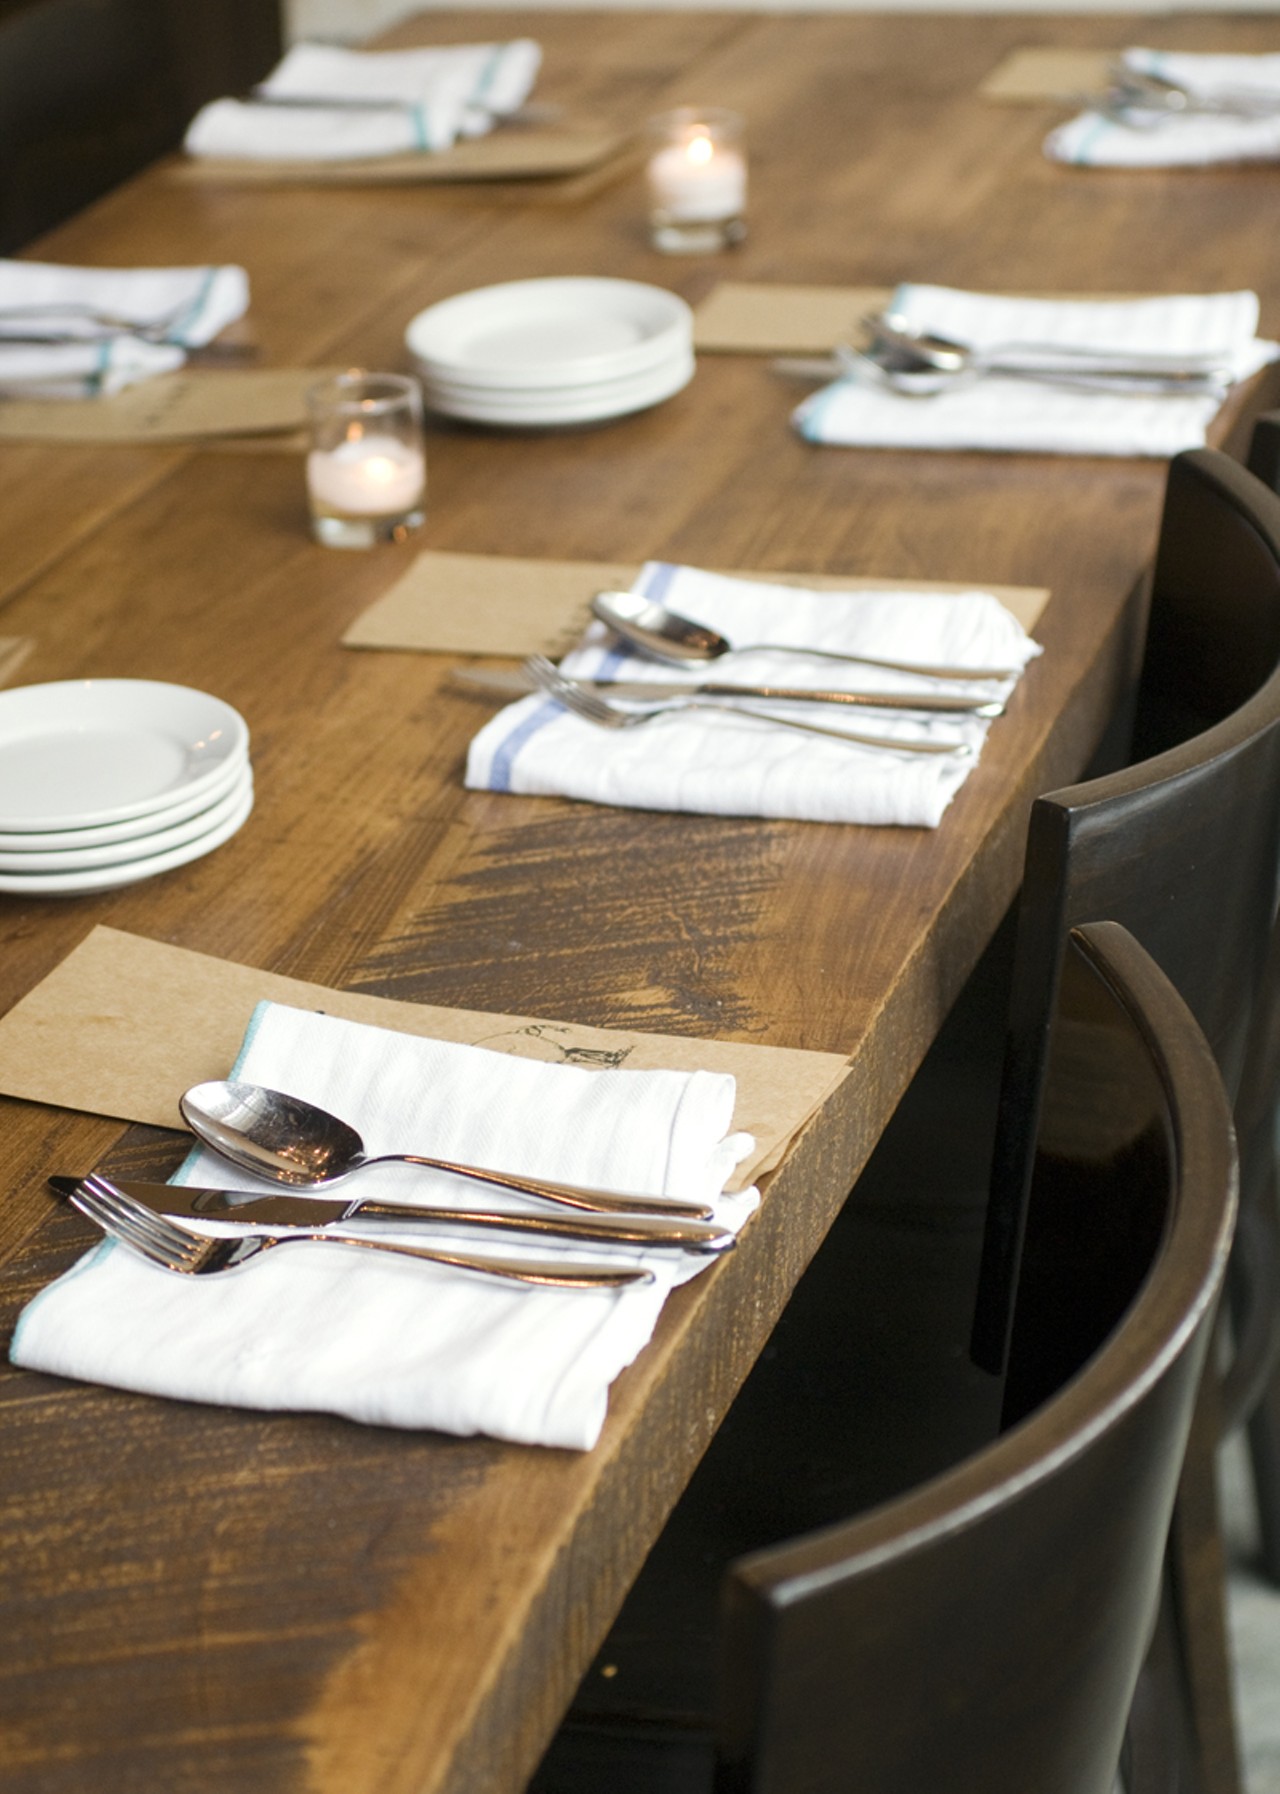 Simply-set tables greet diners when they arrive in the Benton Park restaurant.